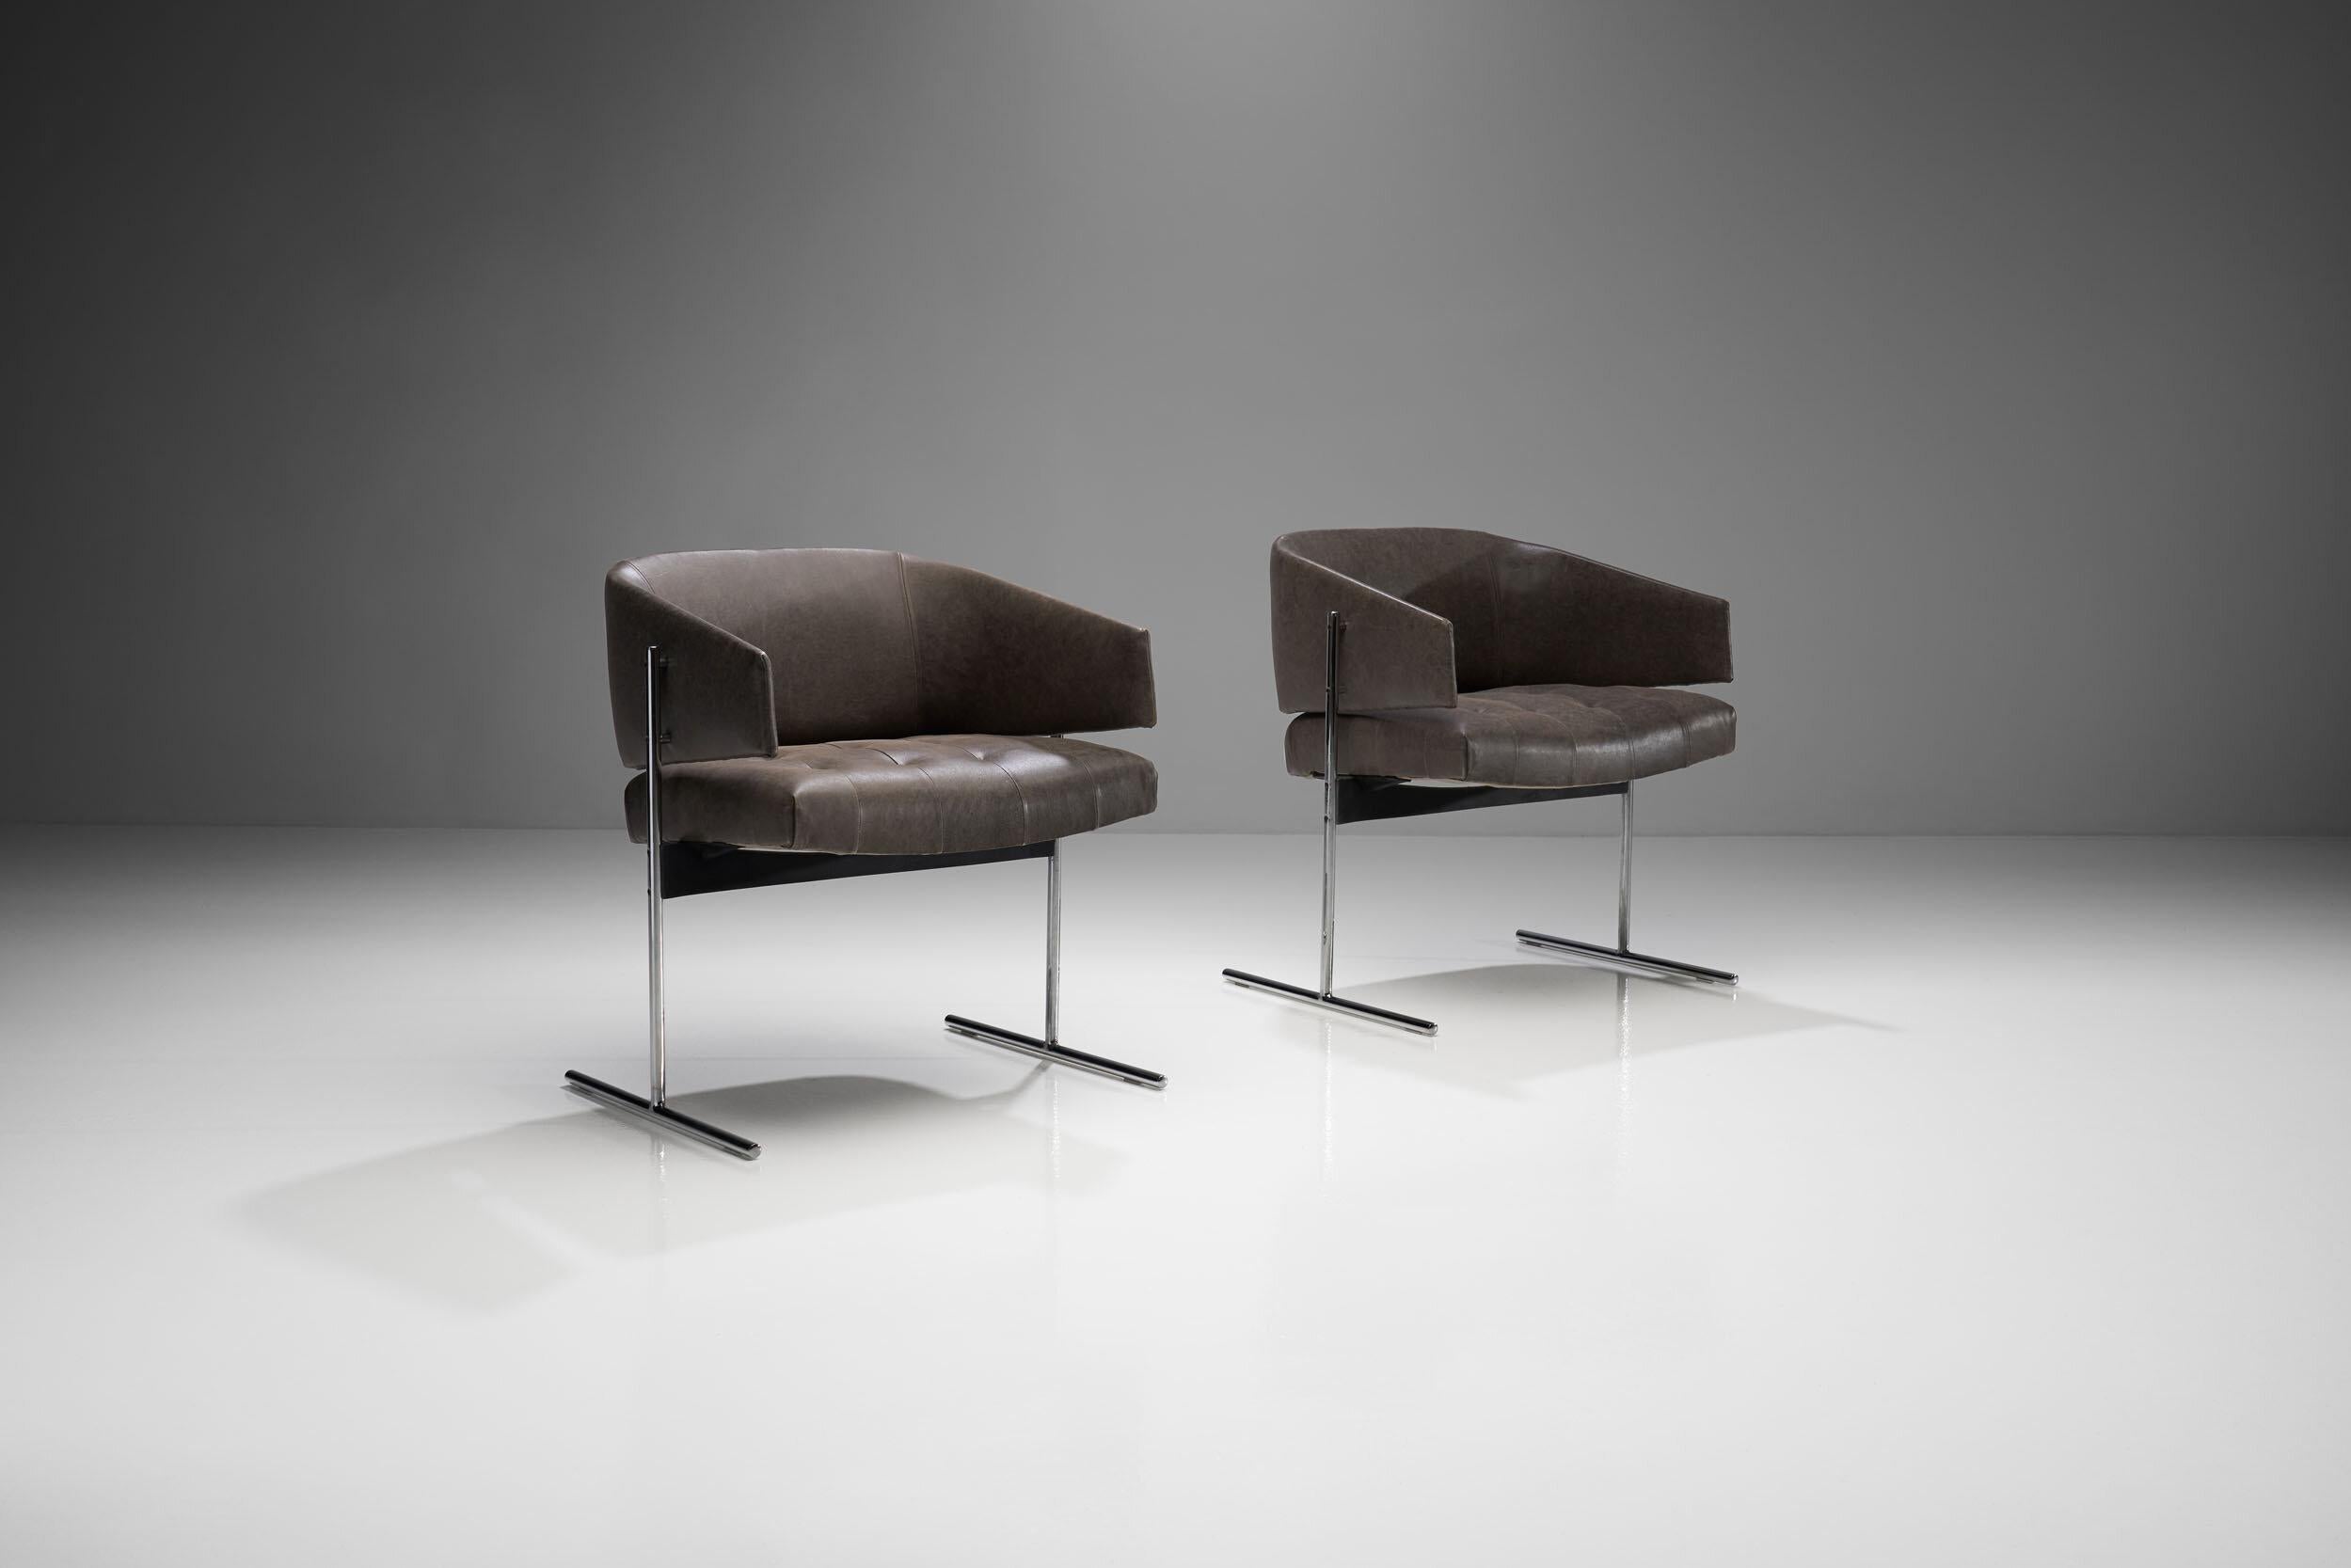 Designed between 1959-1969 by Jorge Zalszupin these 'Senior' chairs are simultaneously understated and elegant. The thin stainless steel legs that have been cleverly designed to carry all the weight, give the upholstered curved back and seat an